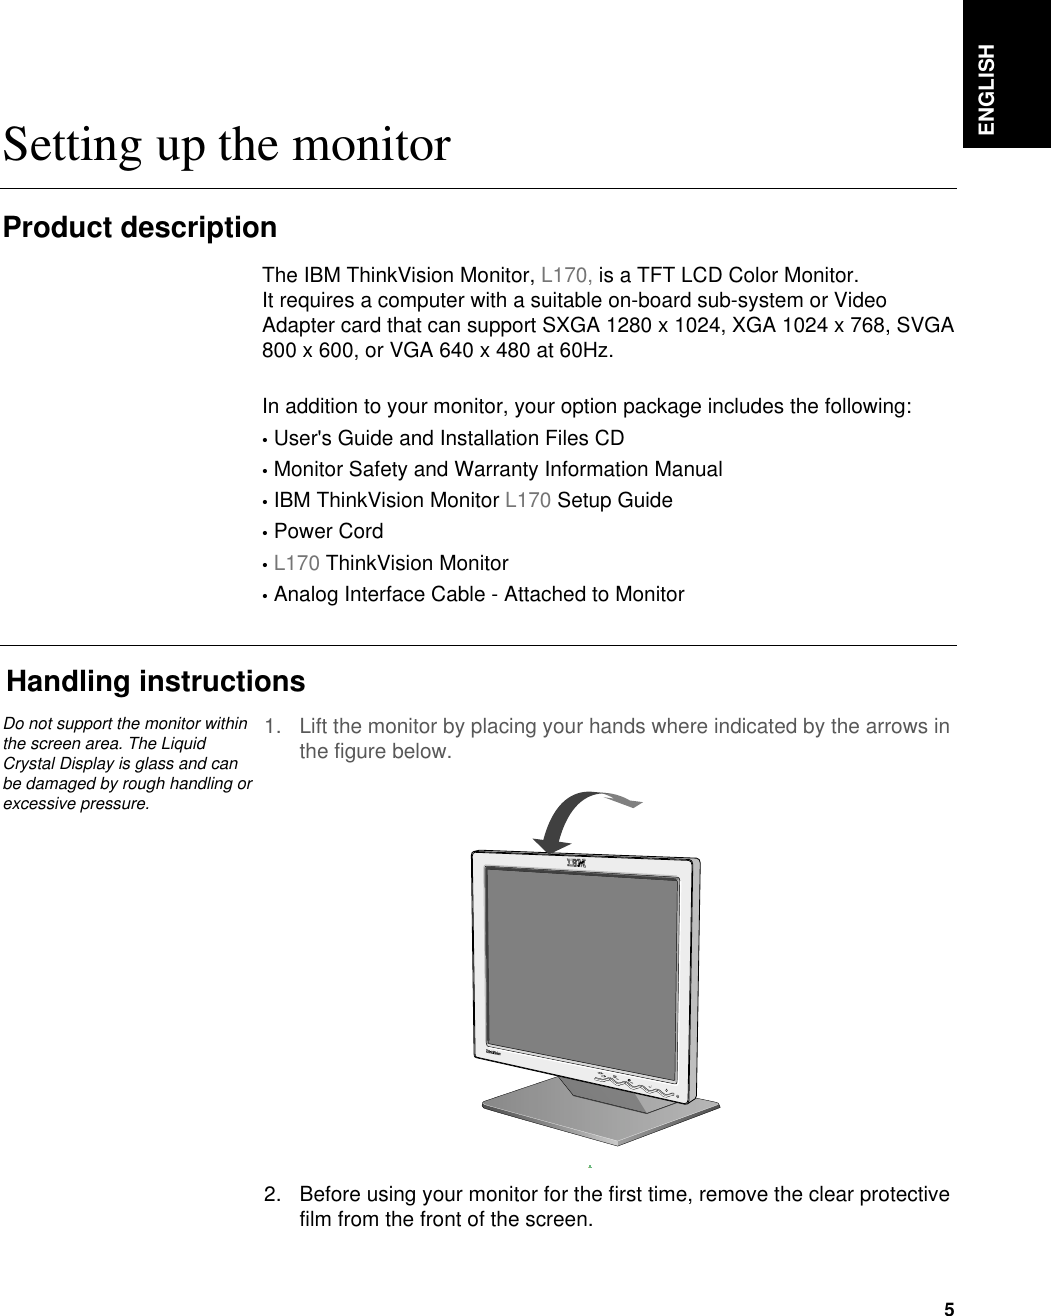 ENGLISH5Setting up the monitorHandling instructions1. Lift the monitor by placing your hands where indicated by the arrows inthe figure below. 2. Before using your monitor for the first time, remove the clear protectivefilm from the front of the screen. Product descriptionThe IBM ThinkVision Monitor, L170, is a TFT LCD Color Monitor. It requires a computer with a suitable on-board sub-system or VideoAdapter card that can support SXGA 1280 x 1024, XGA 1024 x 768, SVGA800 x 600, or VGA 640 x 480 at 60Hz.In addition to your monitor, your option package includes the following:•User&apos;s Guide and Installation Files CD•Monitor Safety and Warranty Information Manual•IBM ThinkVision Monitor L170 Setup Guide•Power Cord•L170 ThinkVision Monitor•Analog Interface Cable - Attached to MonitorDo not support the monitor withinthe screen area. The LiquidCrystal Display is glass and canbe damaged by rough handling orexcessive pressure.